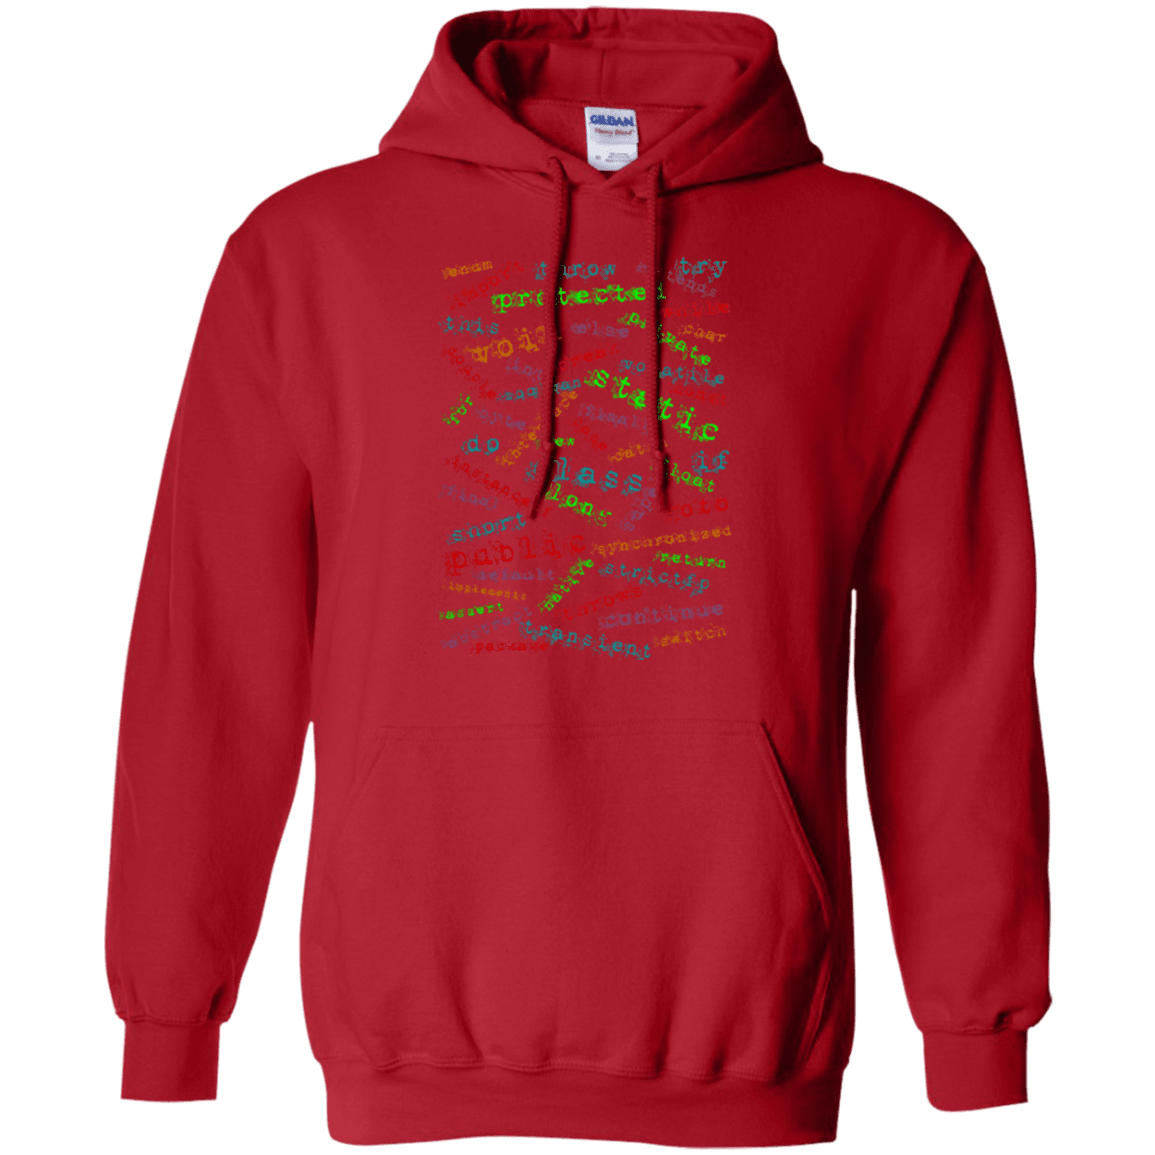 Sweatshirts Red / Small Software Artist Pullover Hoodie